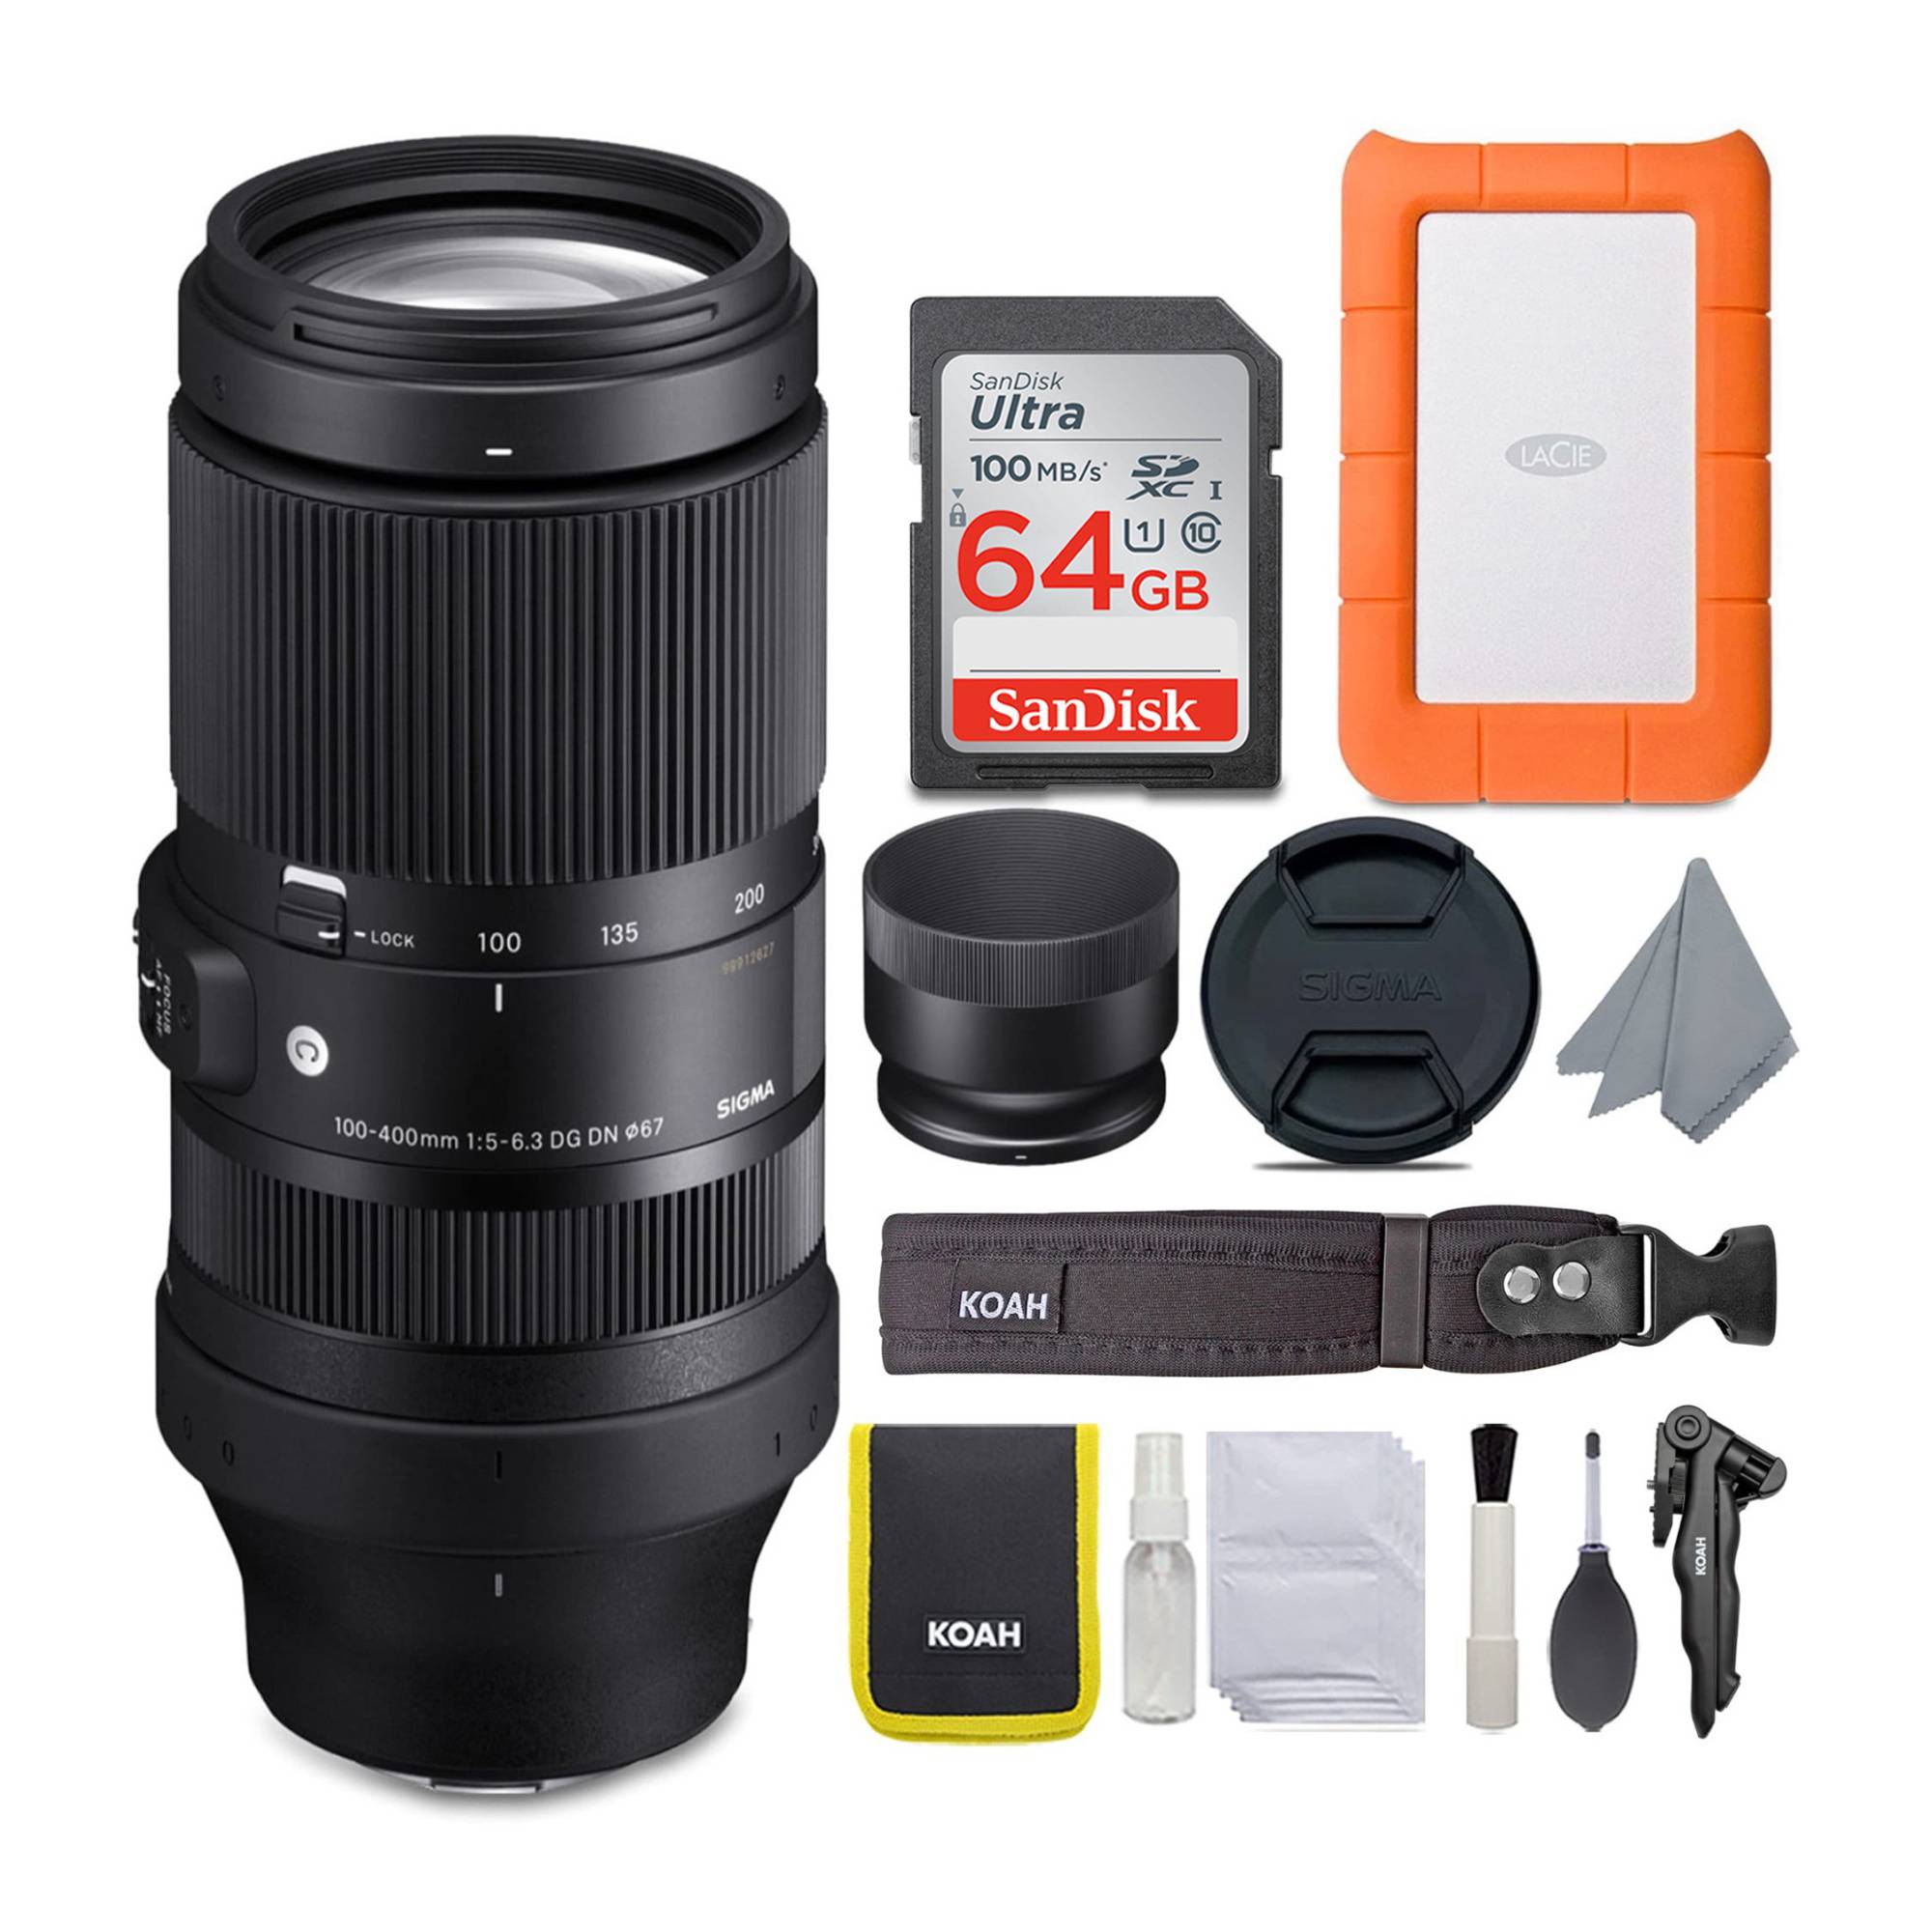 Sigma 100-400mm f/5-6.3 DG DN OS Lens for Sony E-Mount and 1TB HDD Bundle